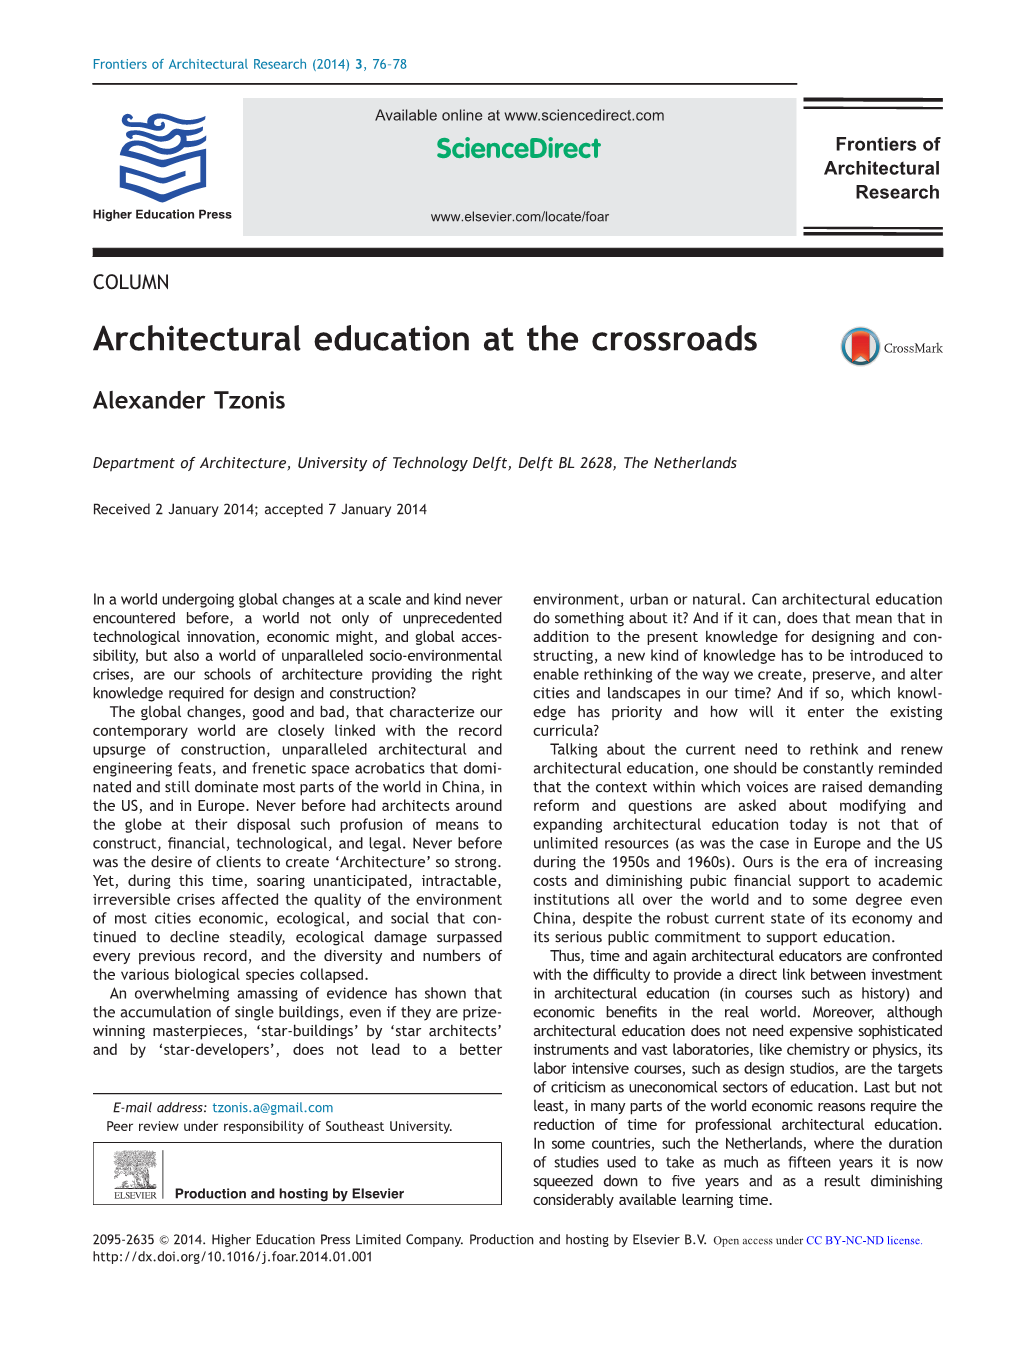 Architectural Education at the Crossroads